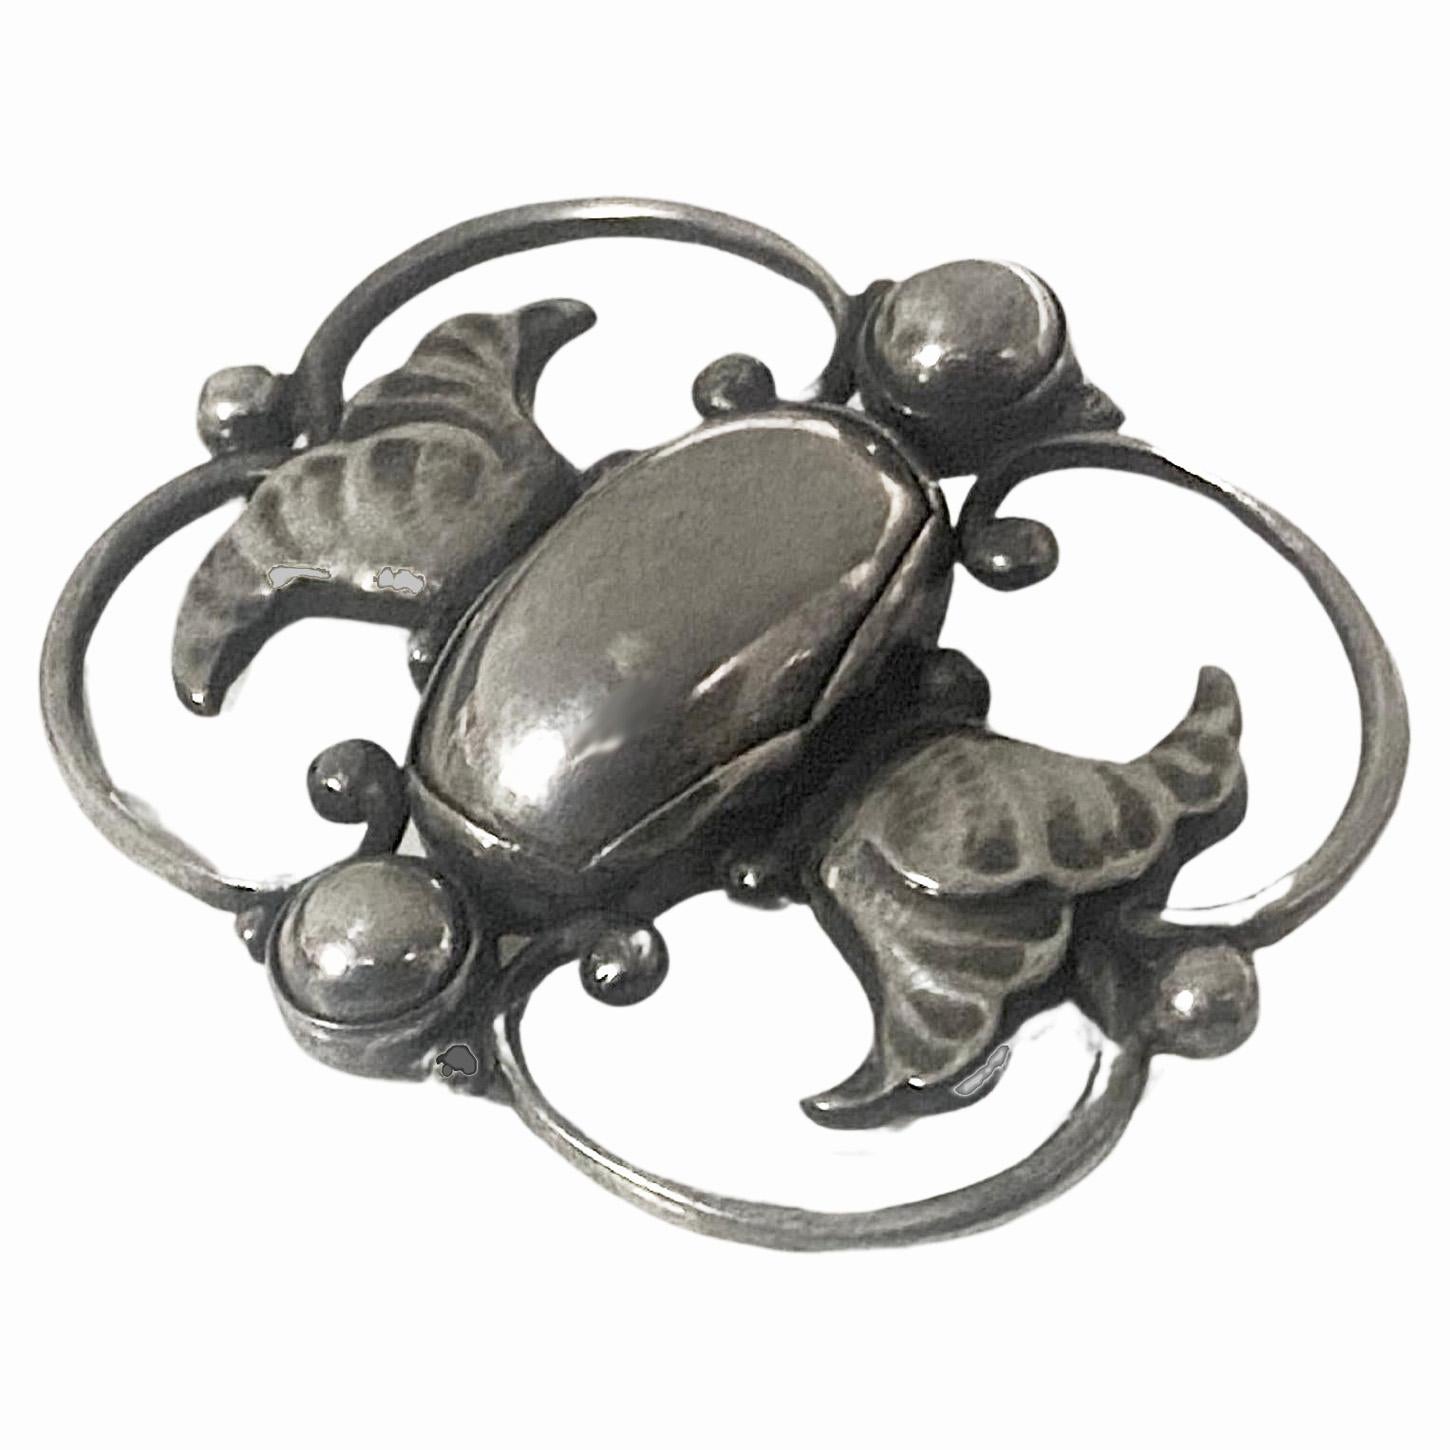 Georg Jensen Sterling Silver Brooch No. 236B. This is the rarer 23bB model tulip design Brooch. Full Georg Jensen marks post 1945 and numbered to the reverse. Measures: 4.13 x 3.33 cm. Weight: 10.92 grams. Condition: Good